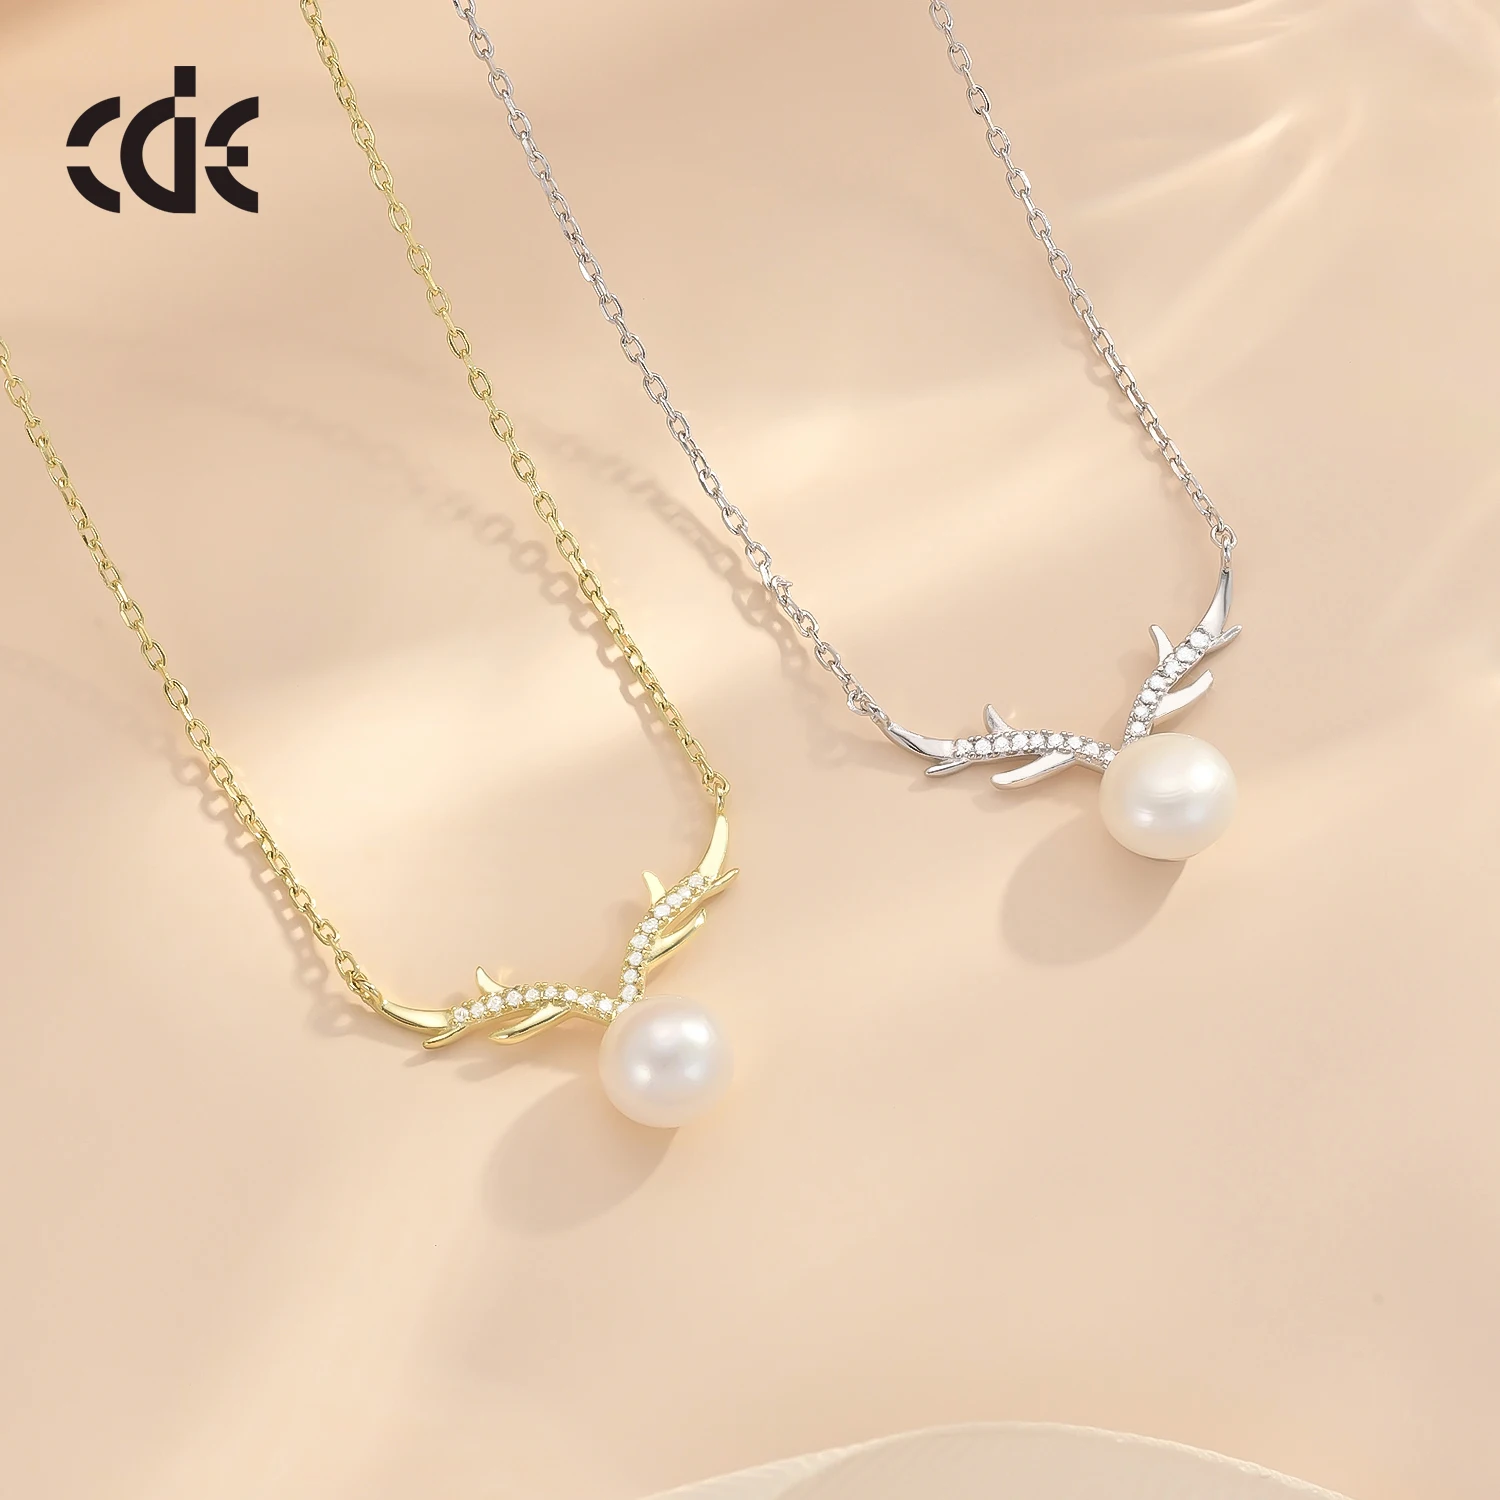 CDE PRYN005 Fine 925 Sterling Silver 14K Gold Plated Jewelry Deer Pendant Necklace Wholesale Pearl Christmas Decoration Gift